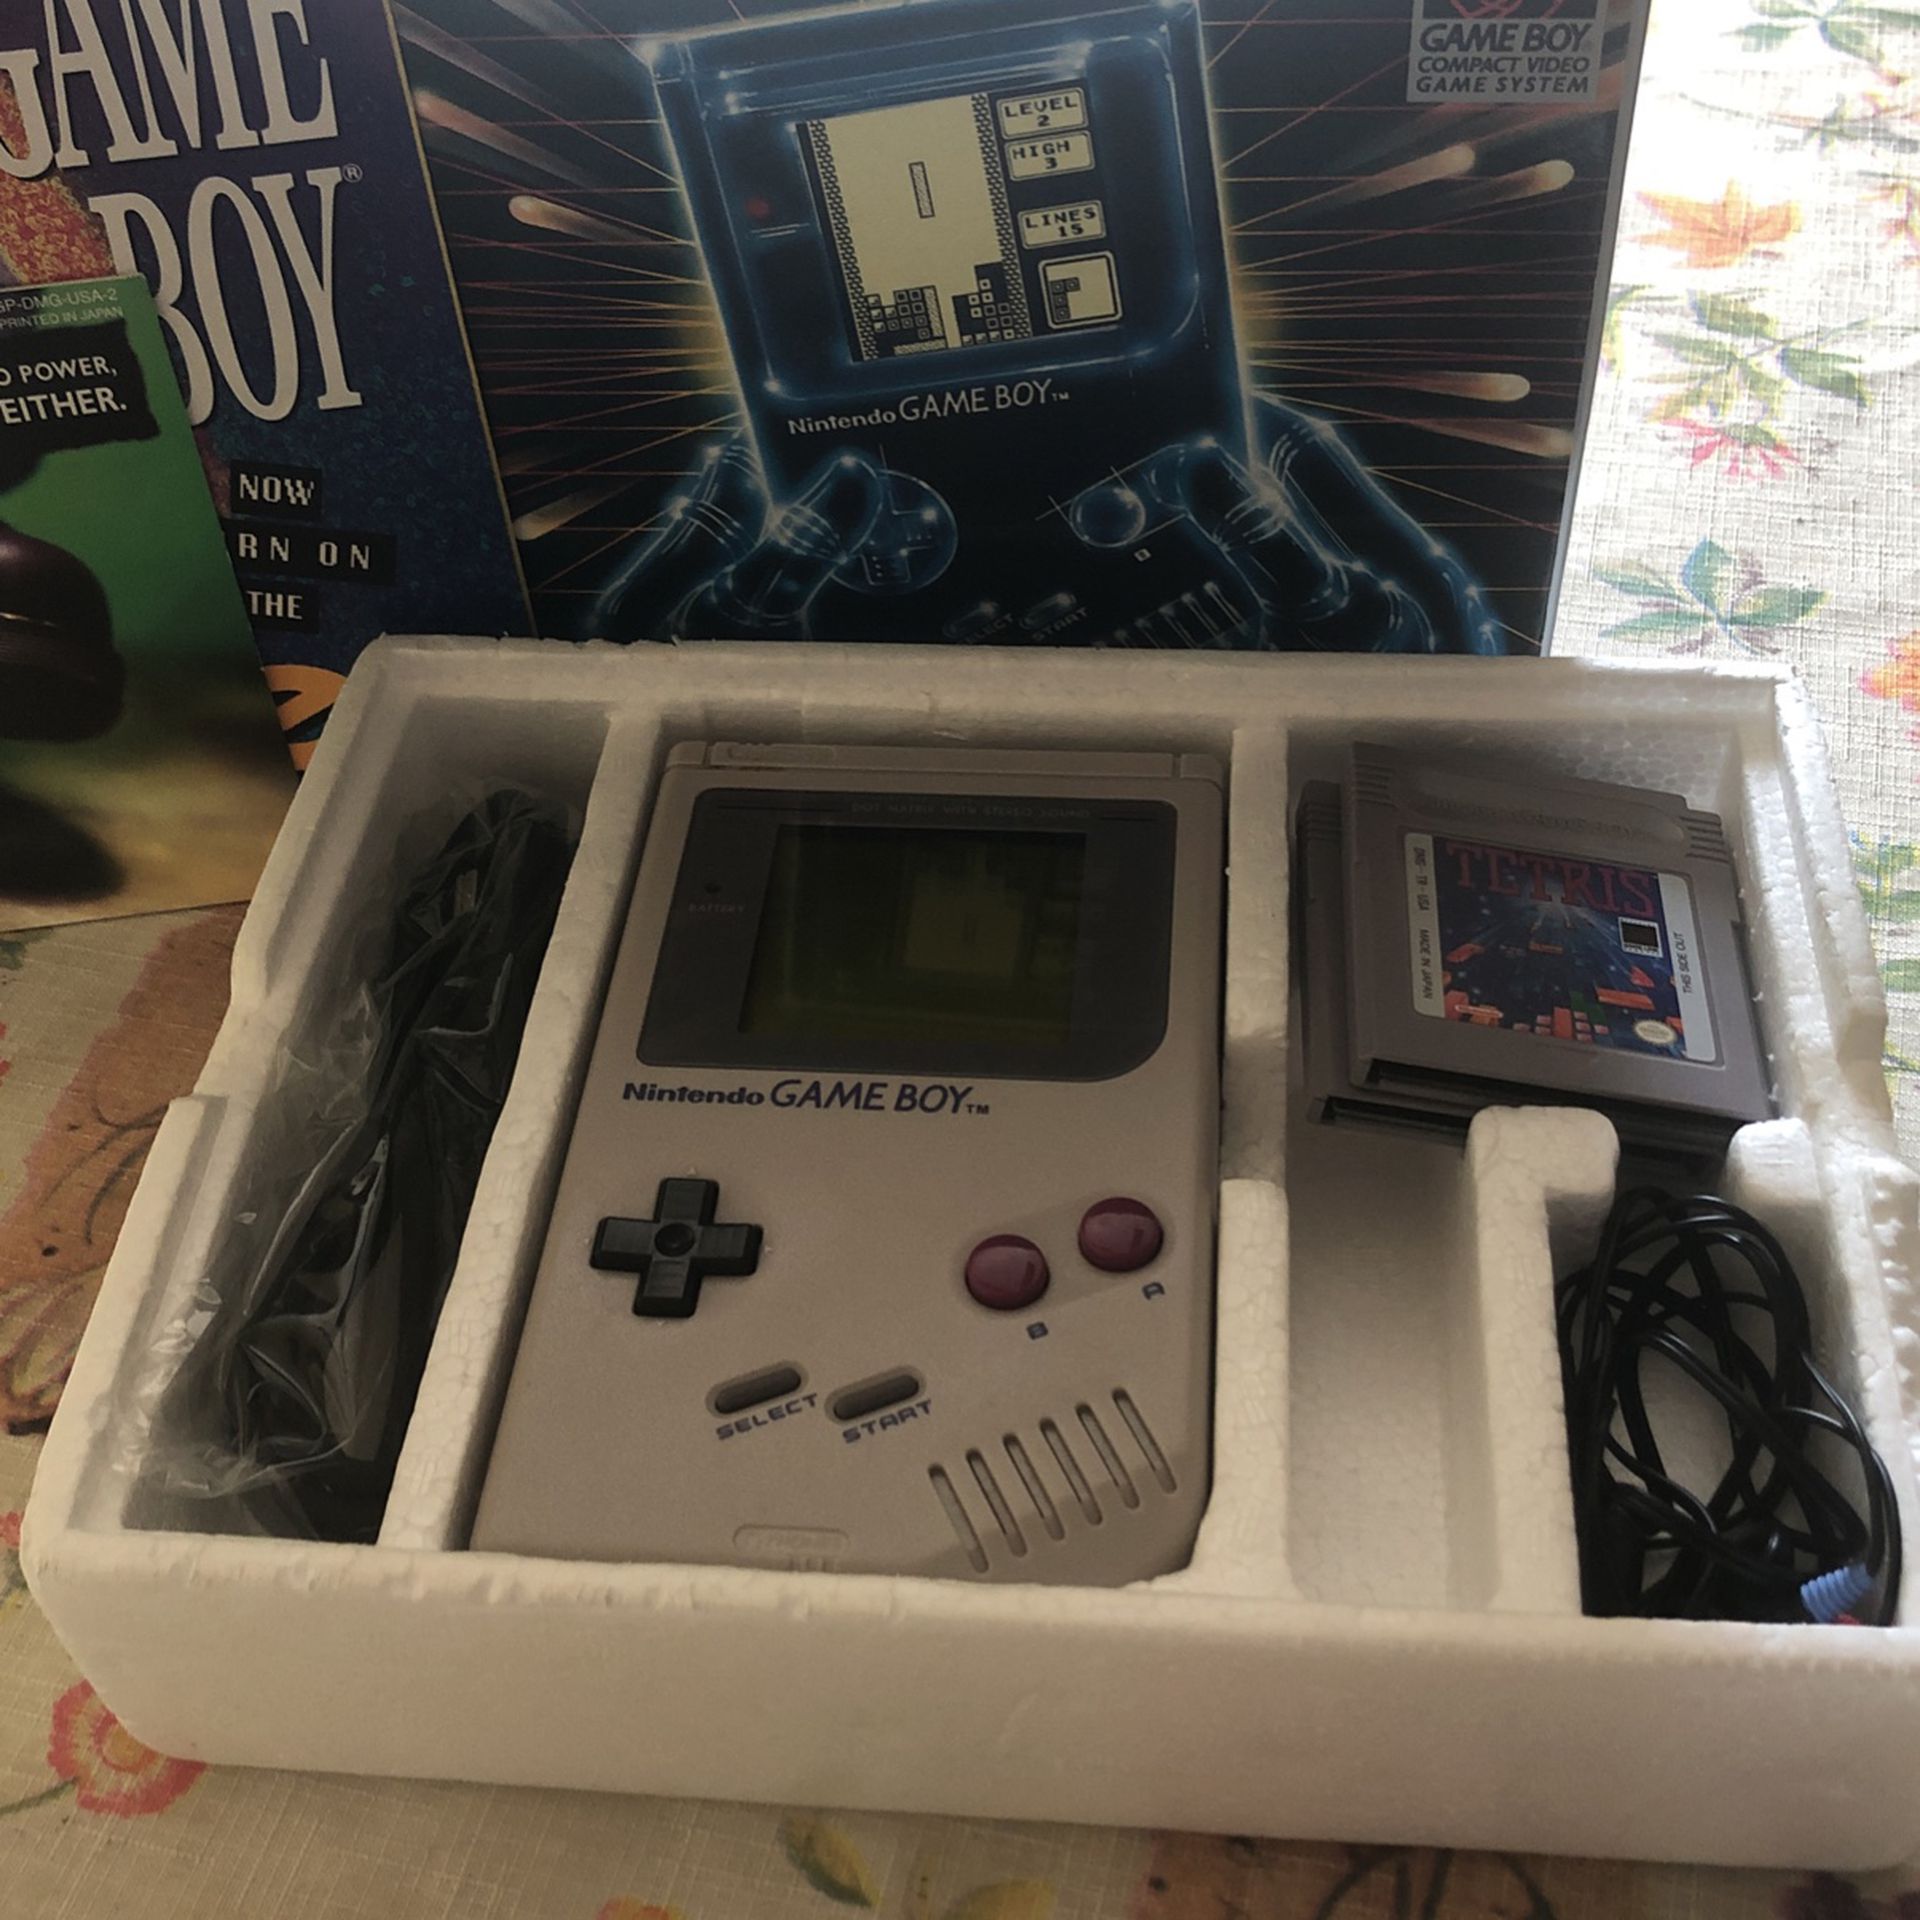 Nintendo GAME BOY OFFICIAL COMPACT VIDEO GAME SYSTEM  ORIGINAL PACKAGING 